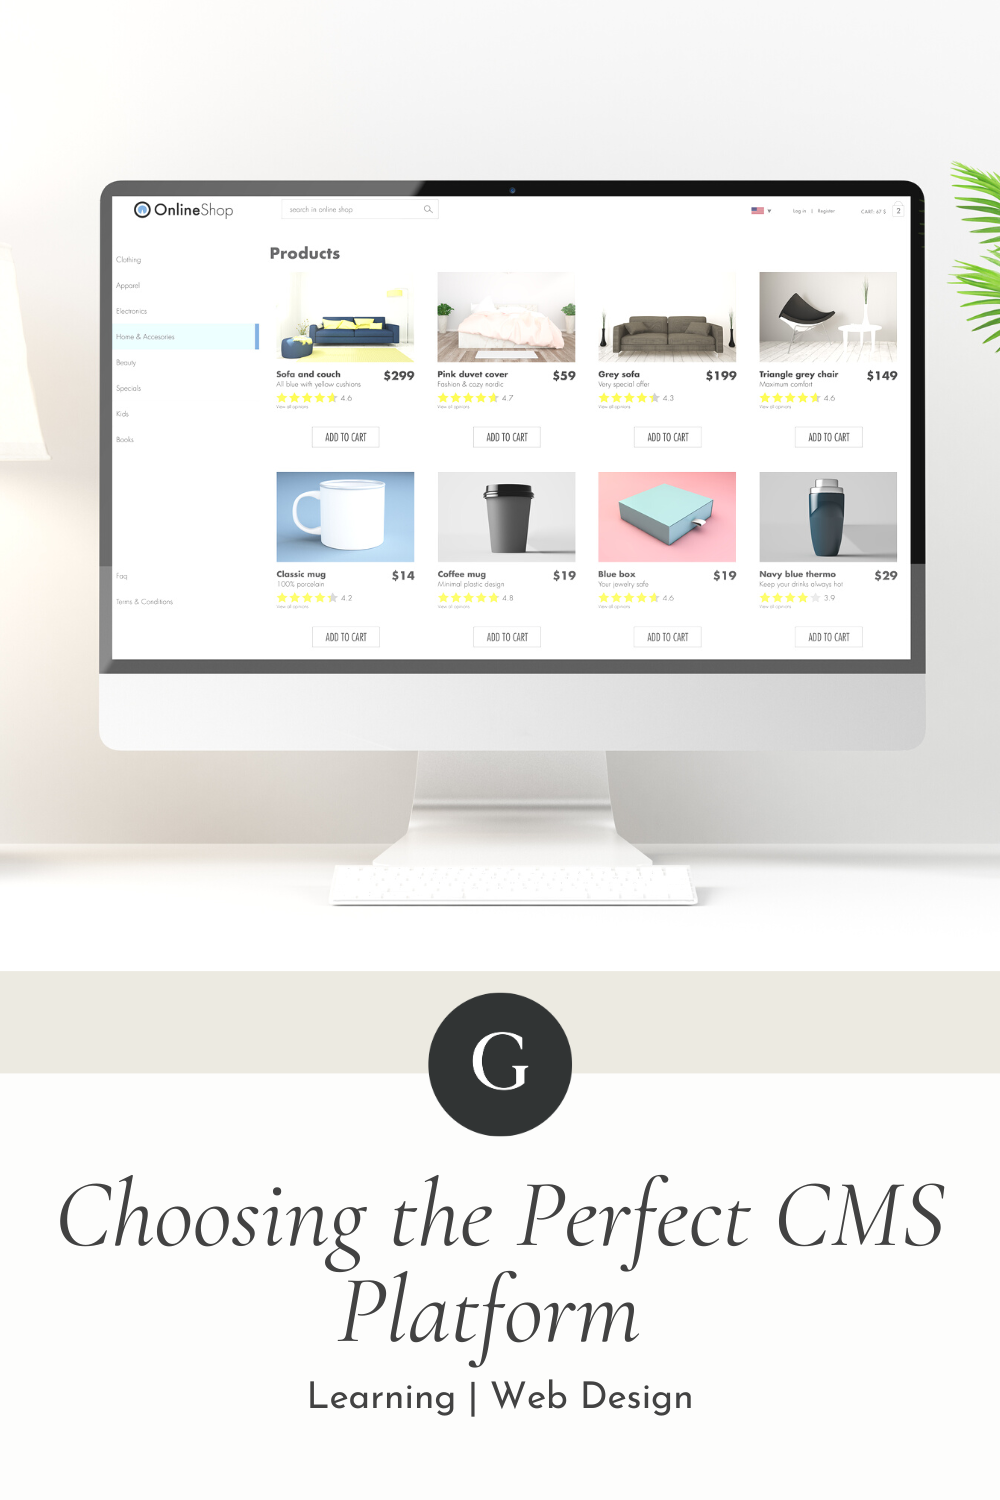 Choosing the Perfect CMS Platform for your Business